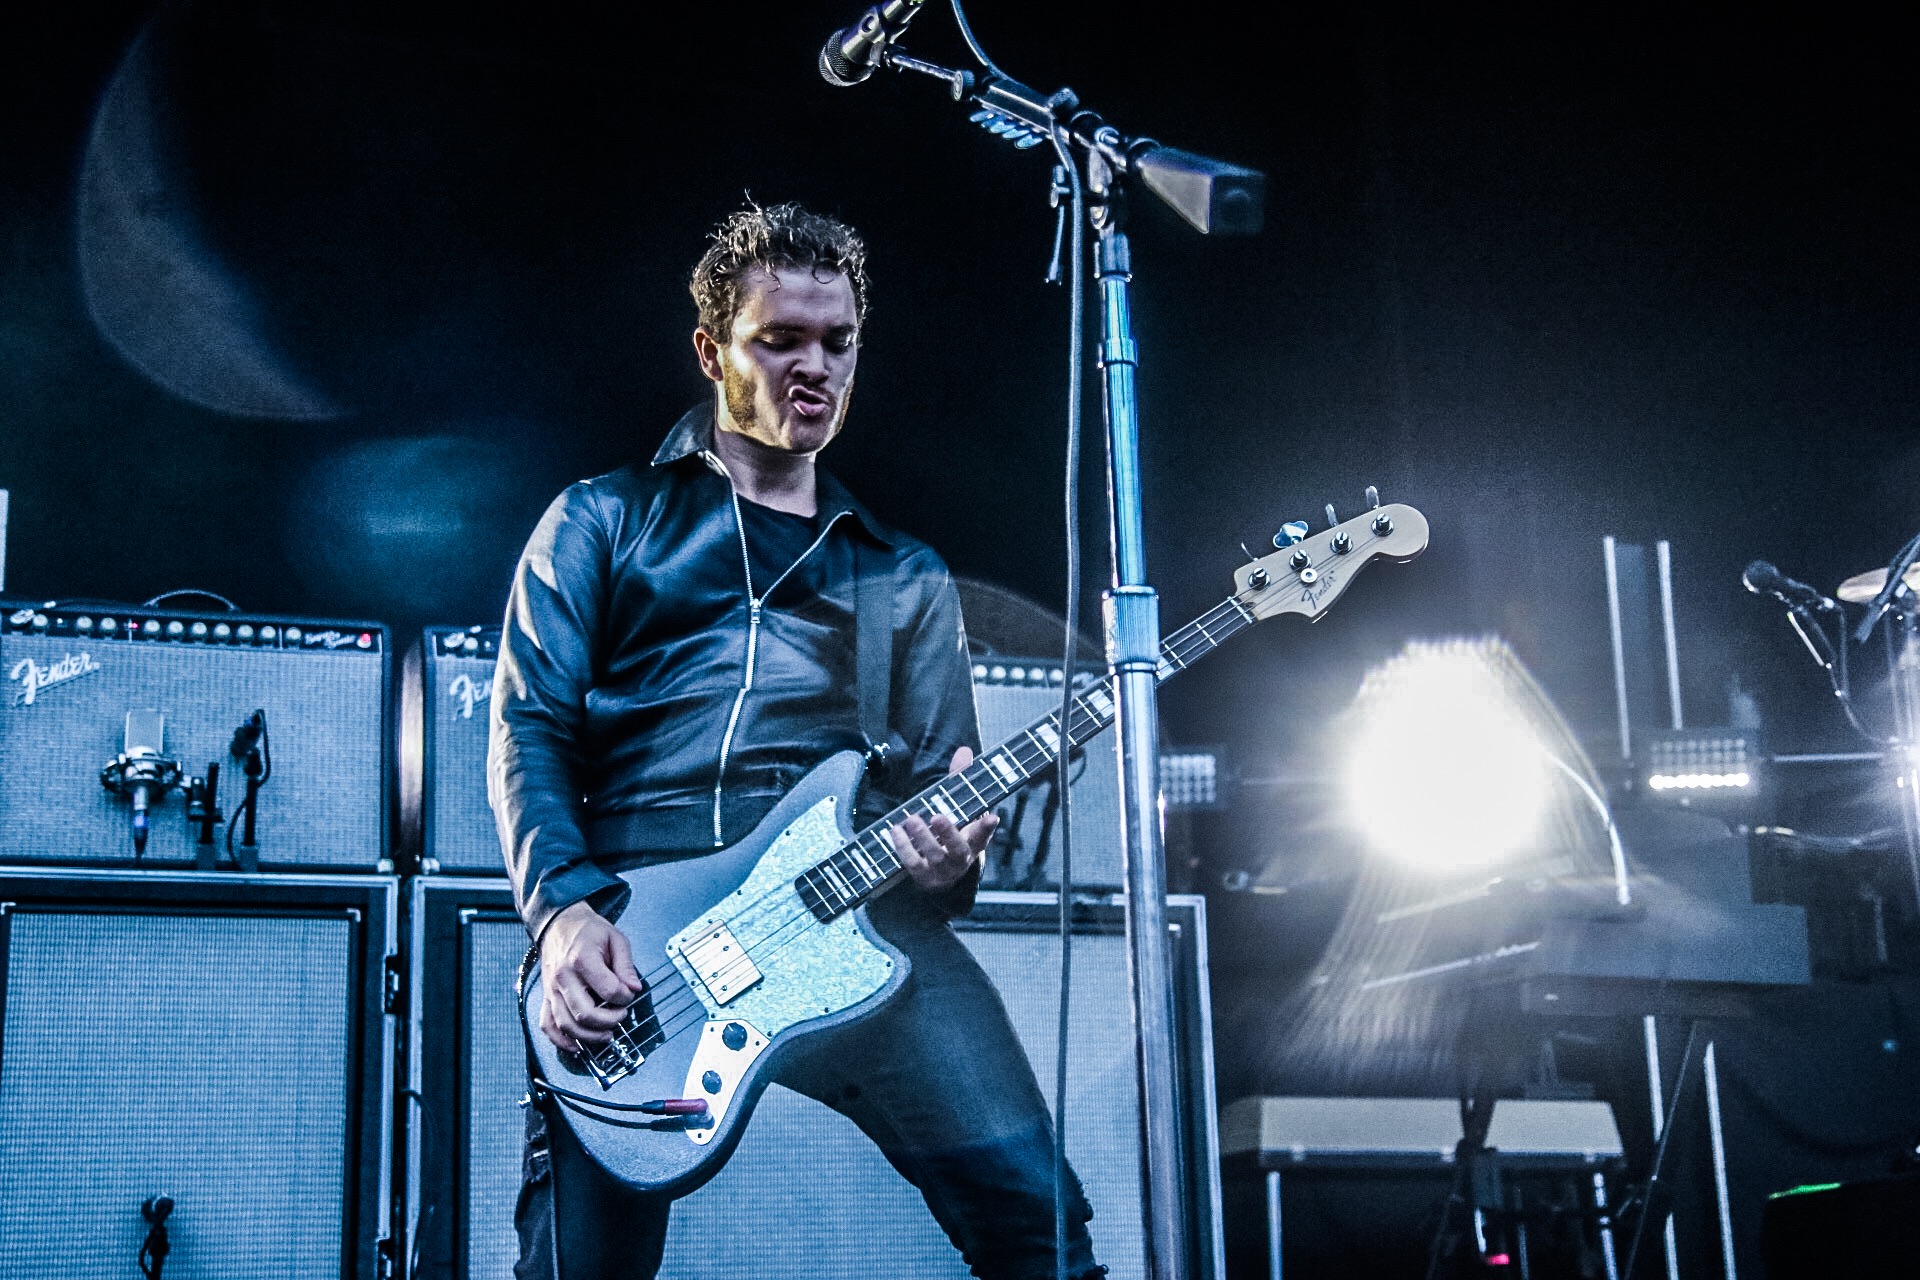 Rock musician performing live with electric guitar, bathed in stage lights, Royal Blood theme HD desktop wallpaper.